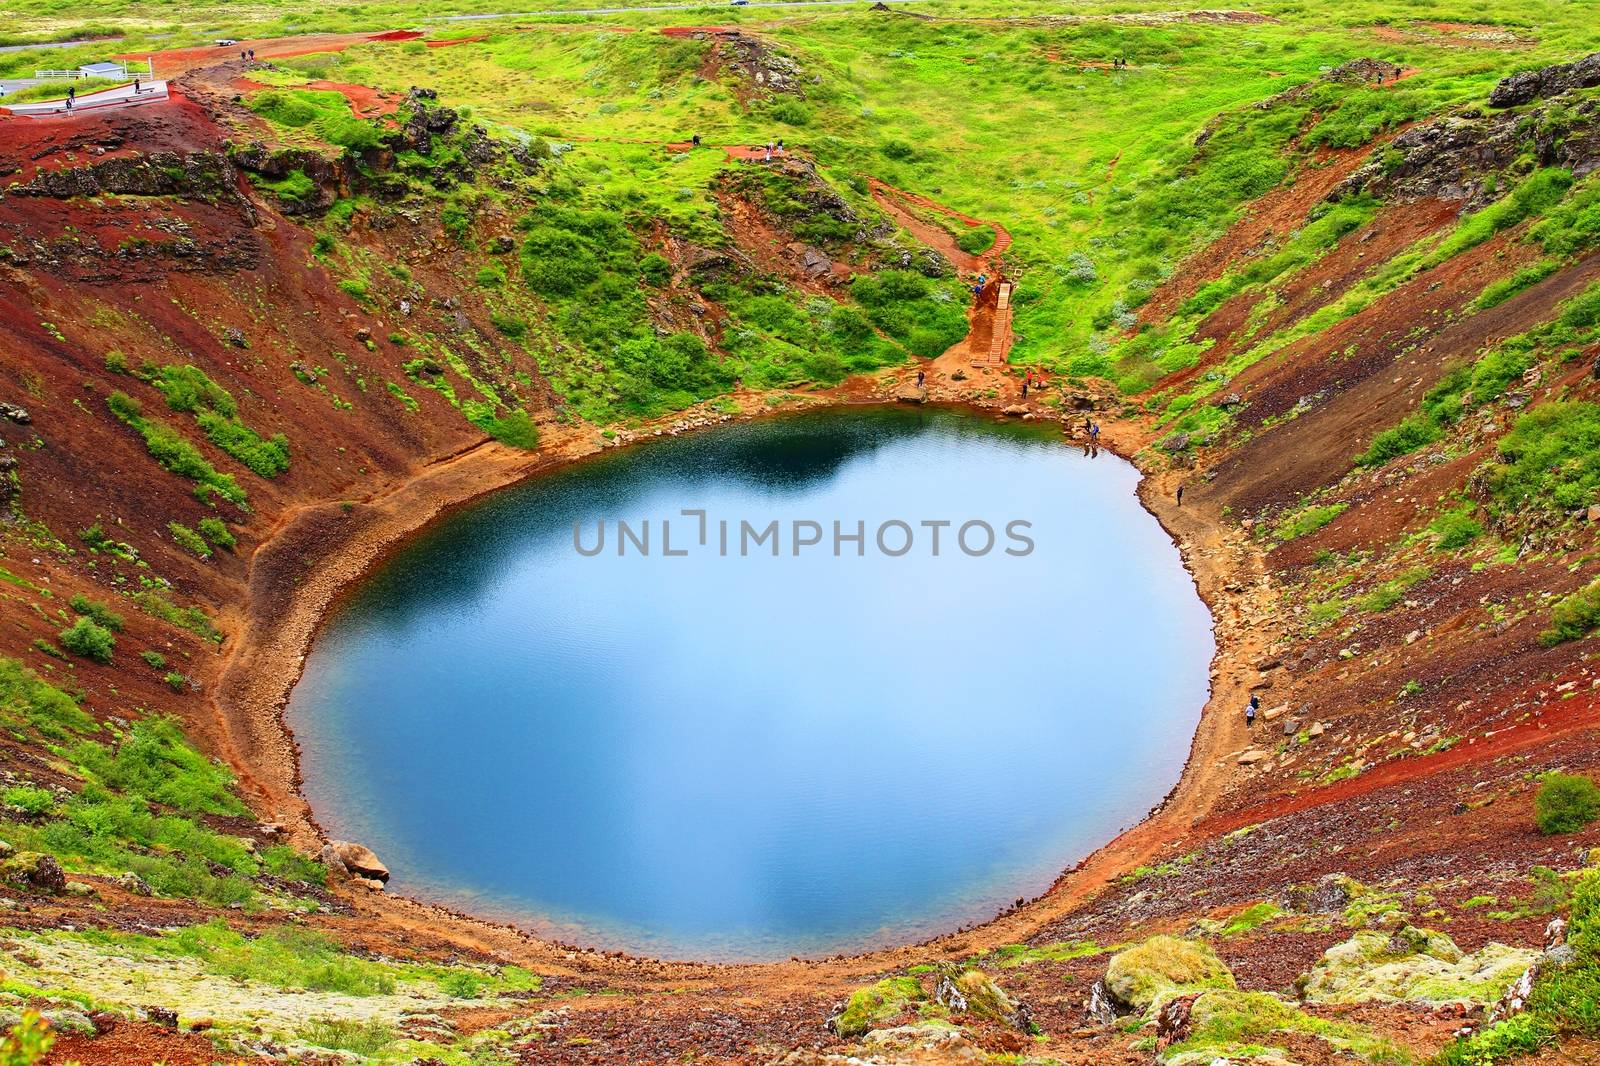 Kerid volcano crater, Iceland by Jindrich_Blecha